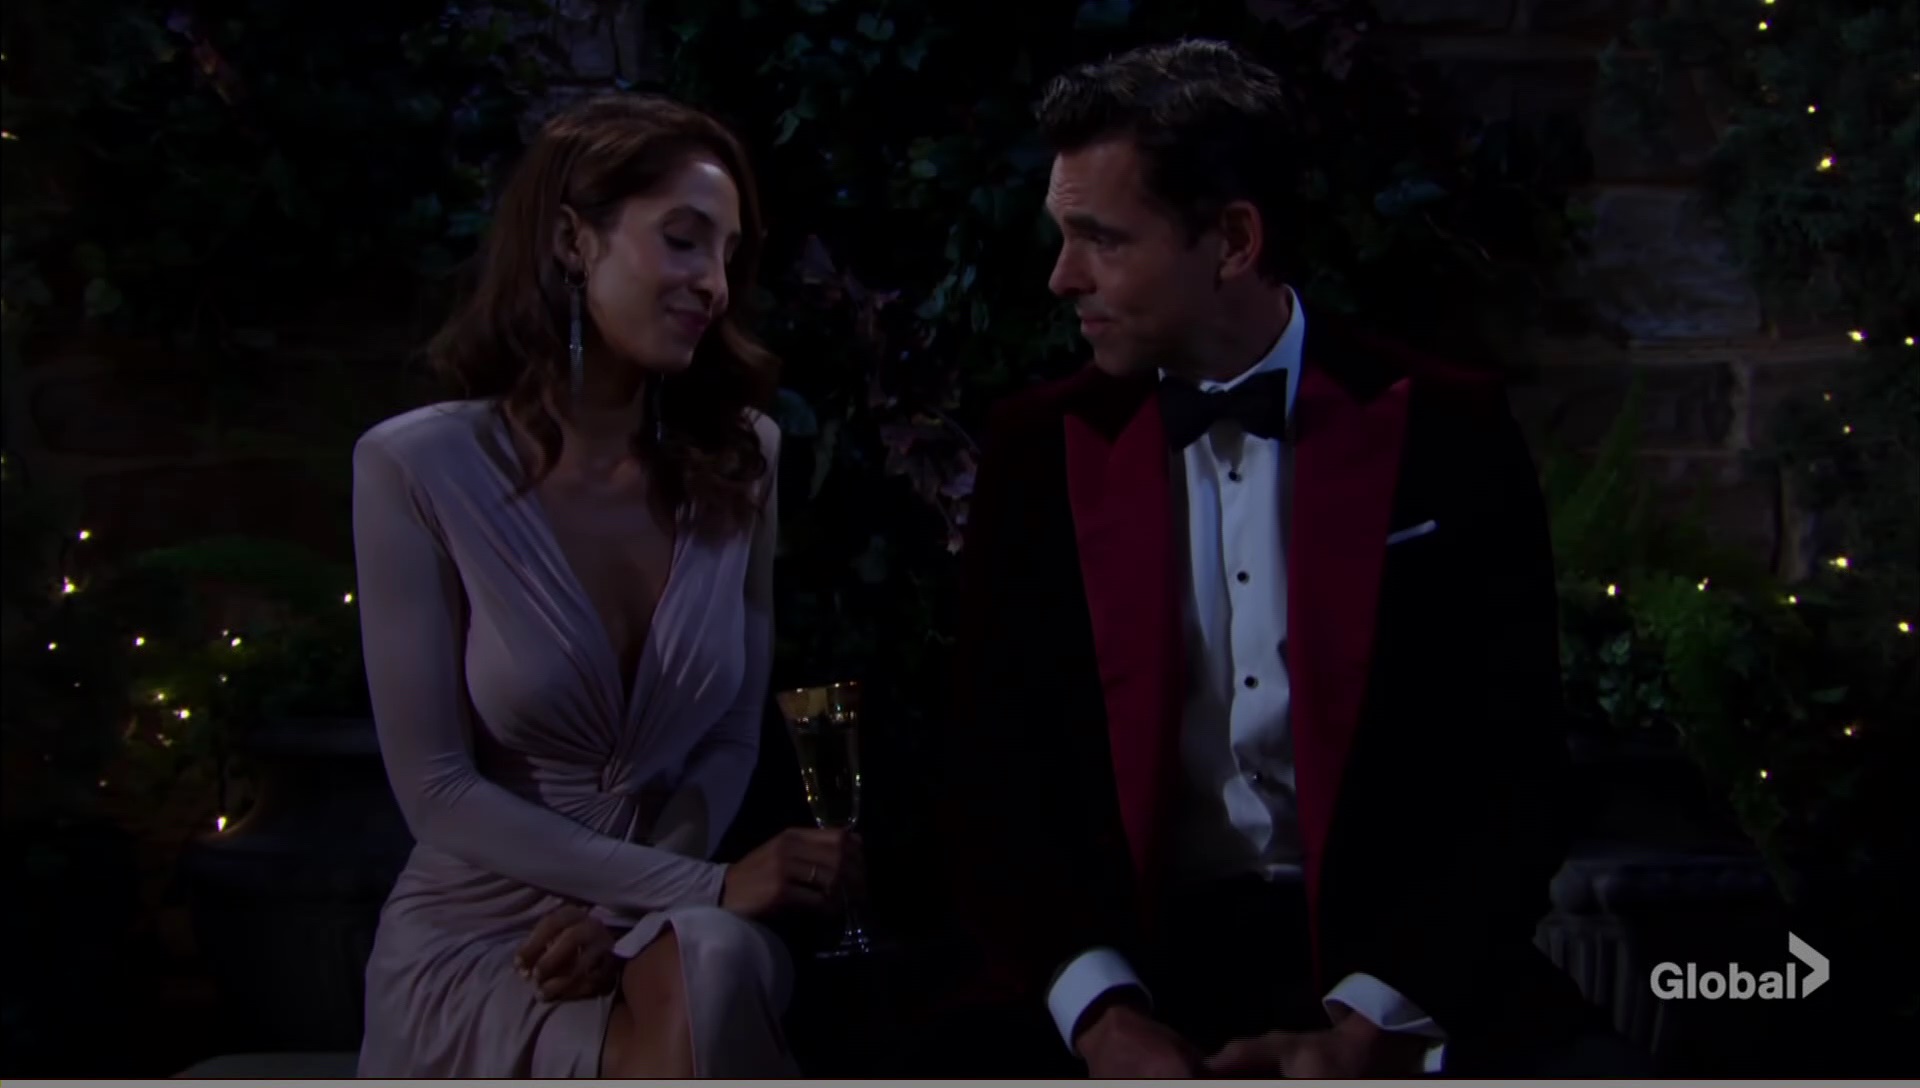 lily billy hang out wedding young restless